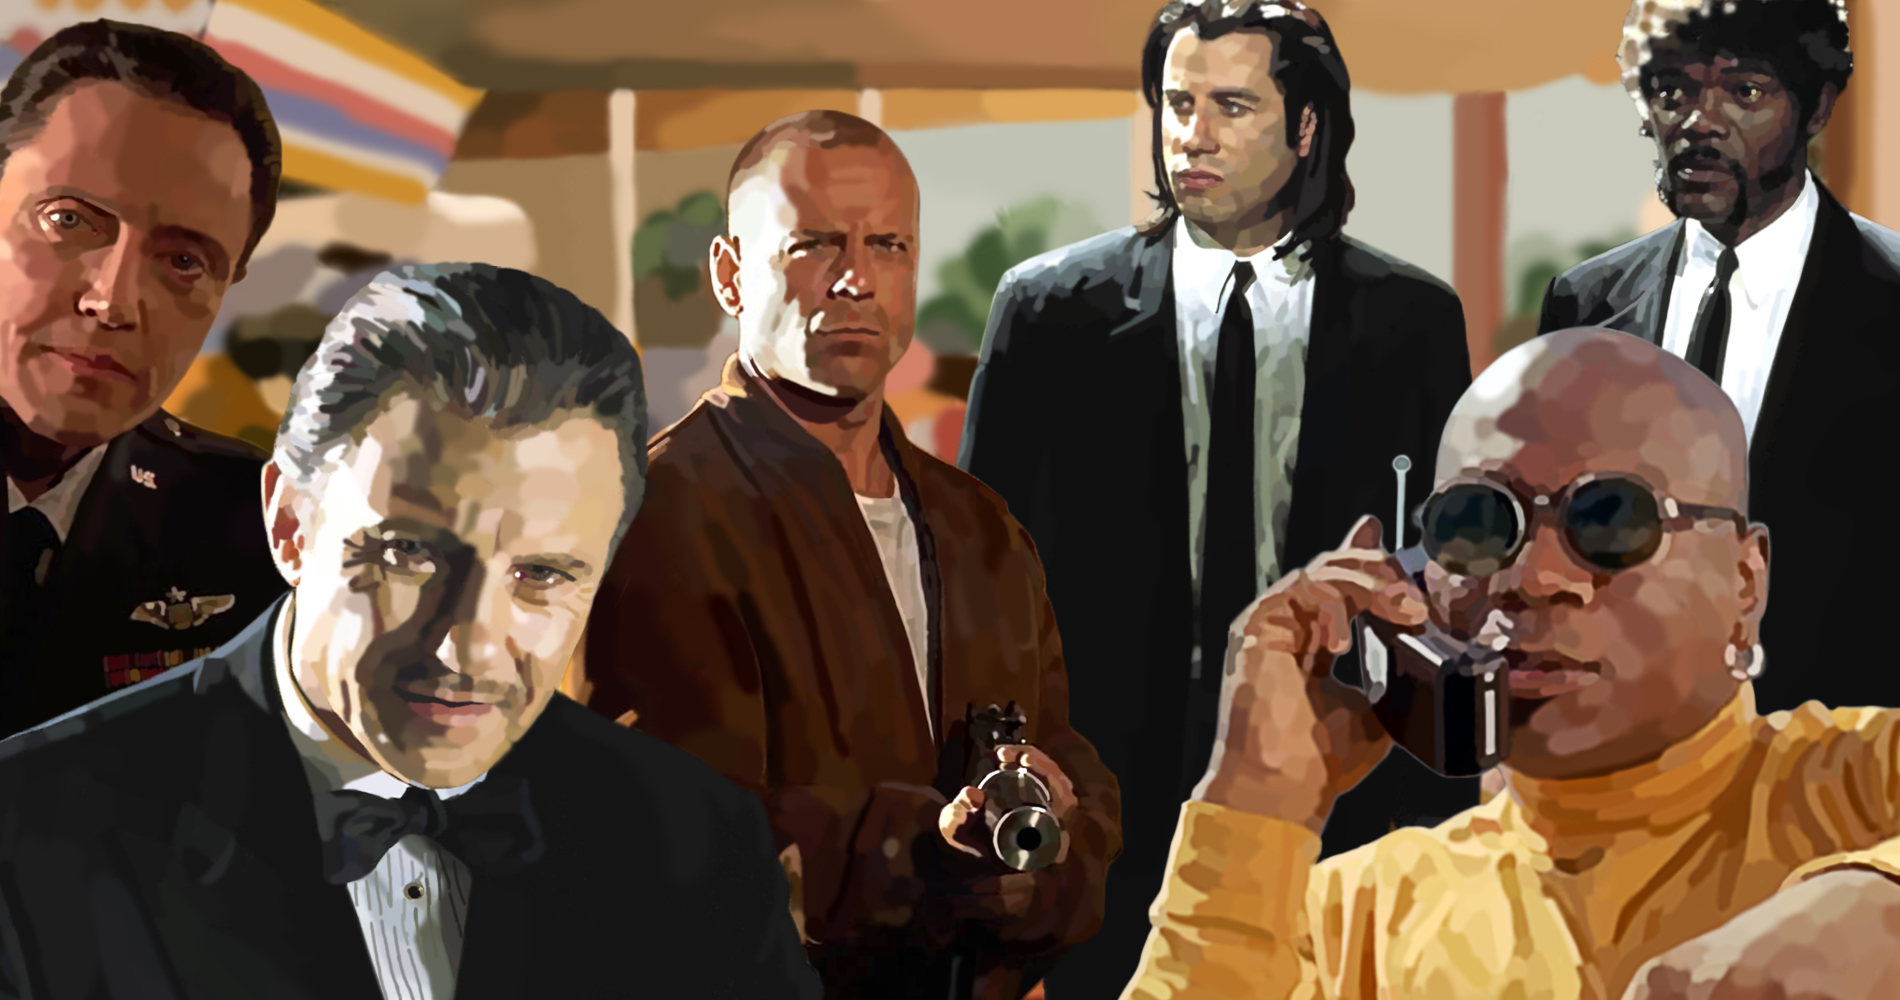 The Pulp Fiction Characters' Guide To Style